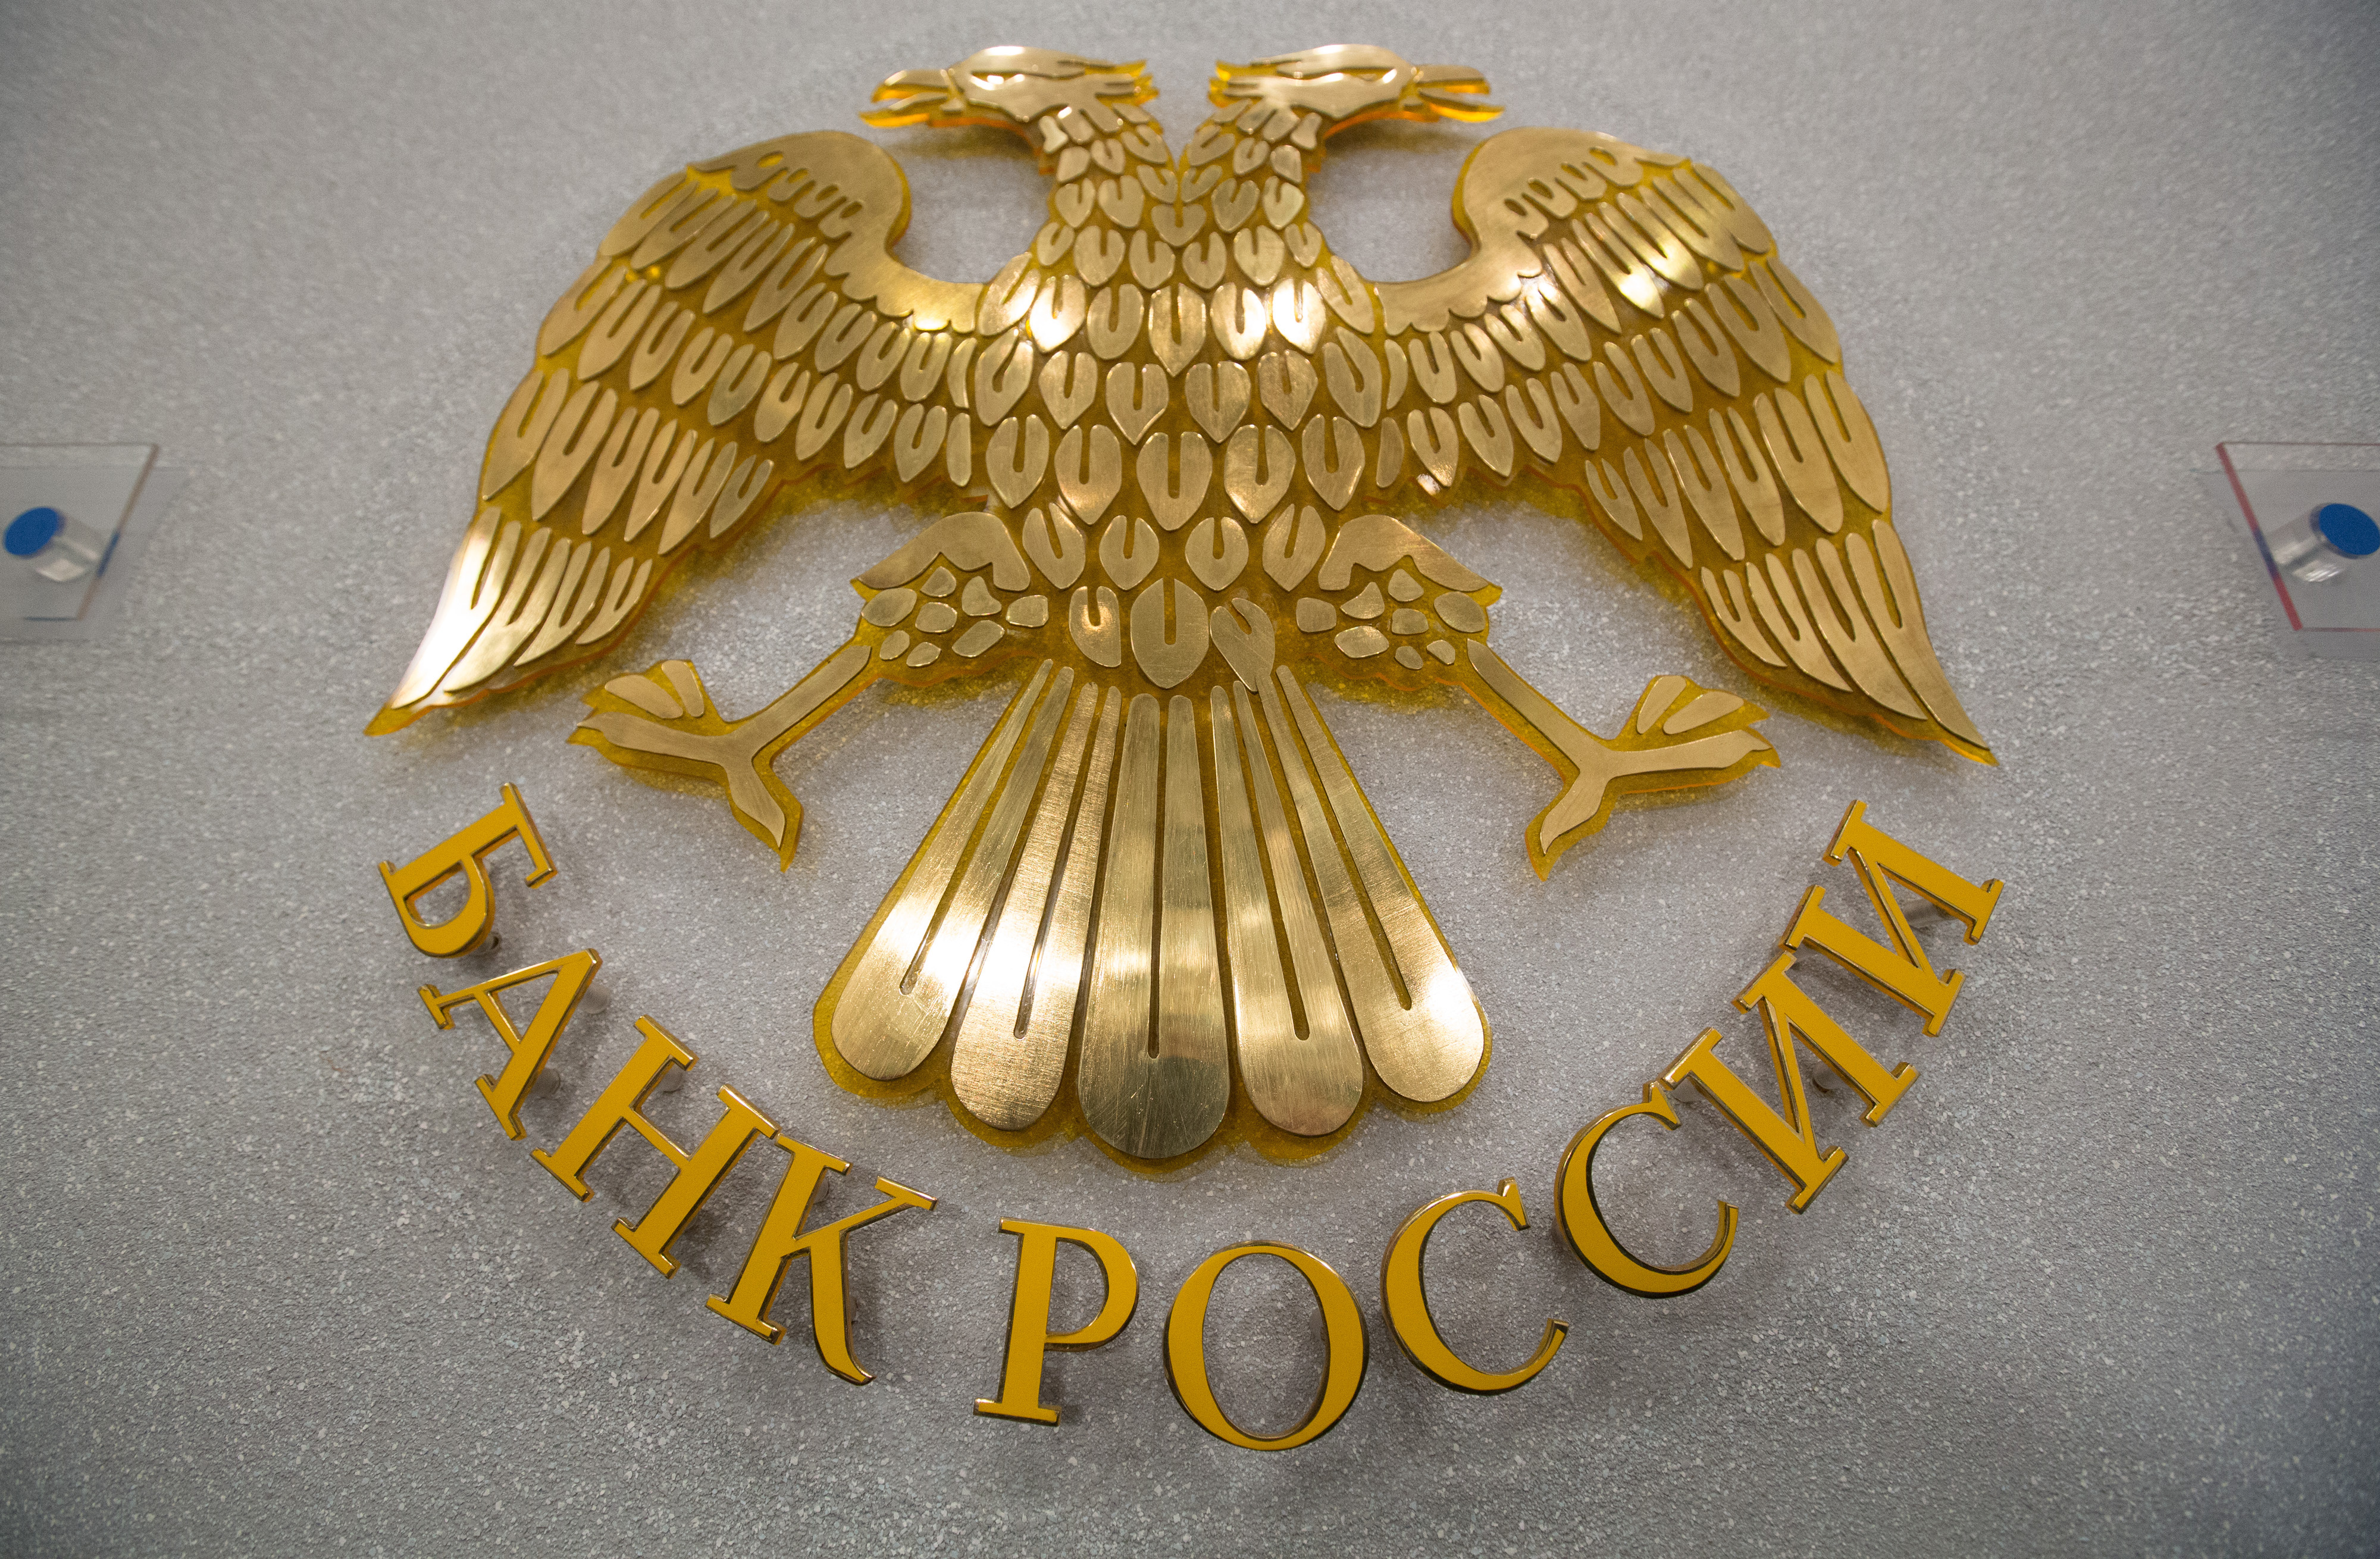 The seal of the Russian Central bank, also known as Bank Rossii, sits on display in Moscow, Russia, on Friday, March 13, 2015. Russia&#39;s central bank lowered its main interest rate in line with most economist forecasts, as stabilizing inflation clears the path to boosting an economy buckling under low oil prices and sanctions over Ukraine. Photographer: Andrey Rudakov/Bloomberg